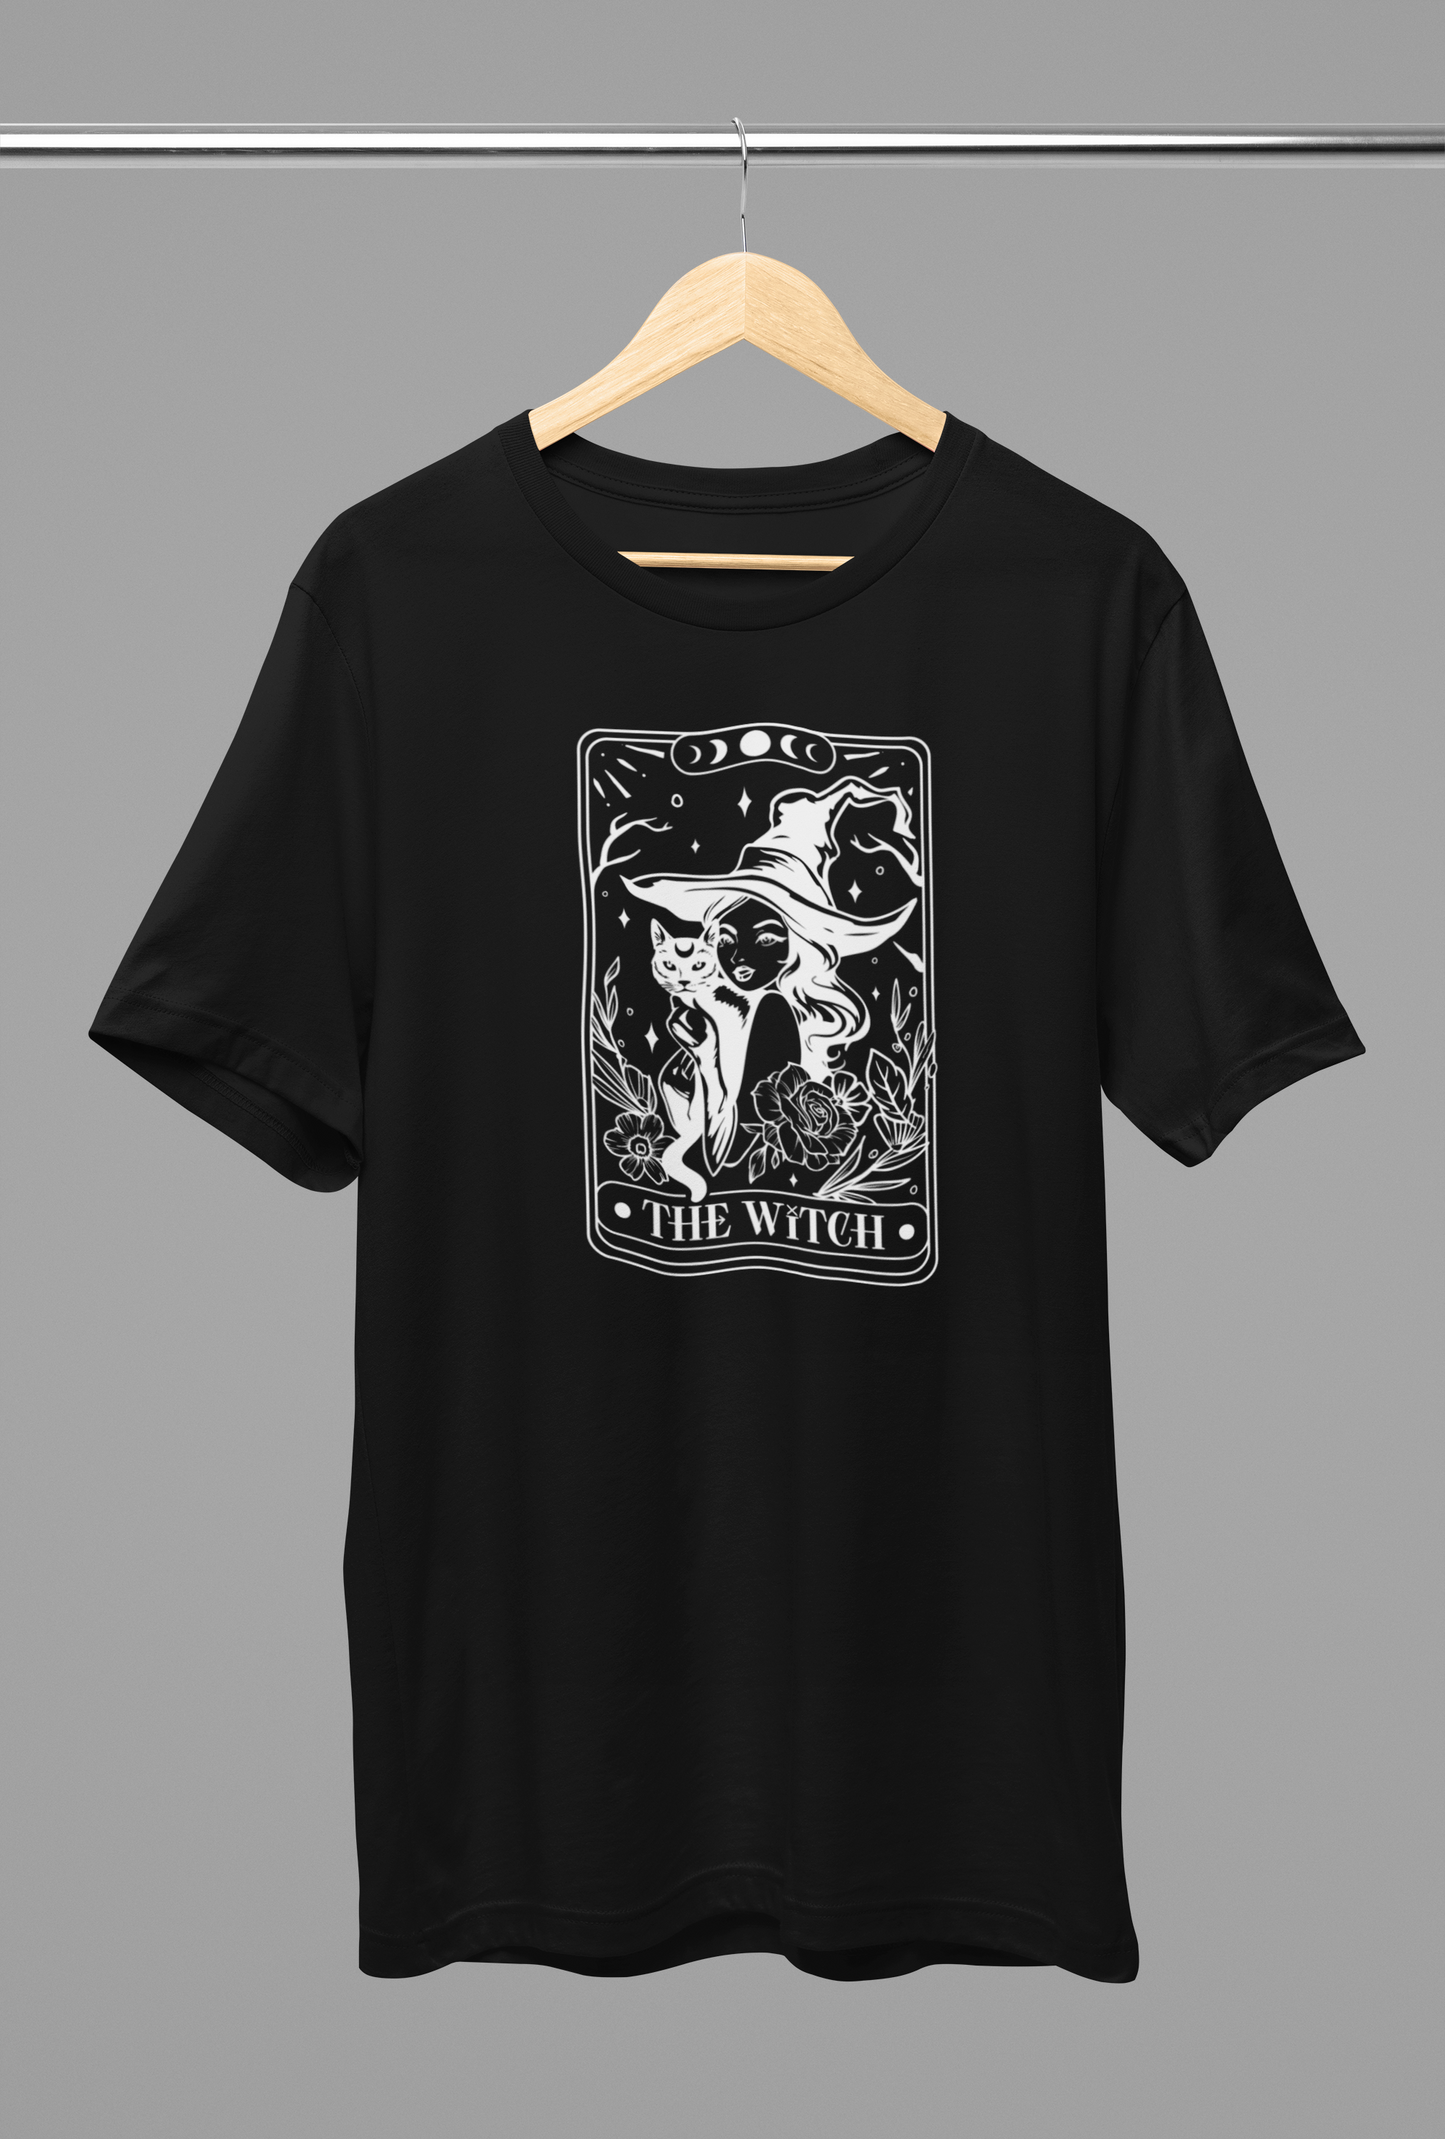 The Witch Tee